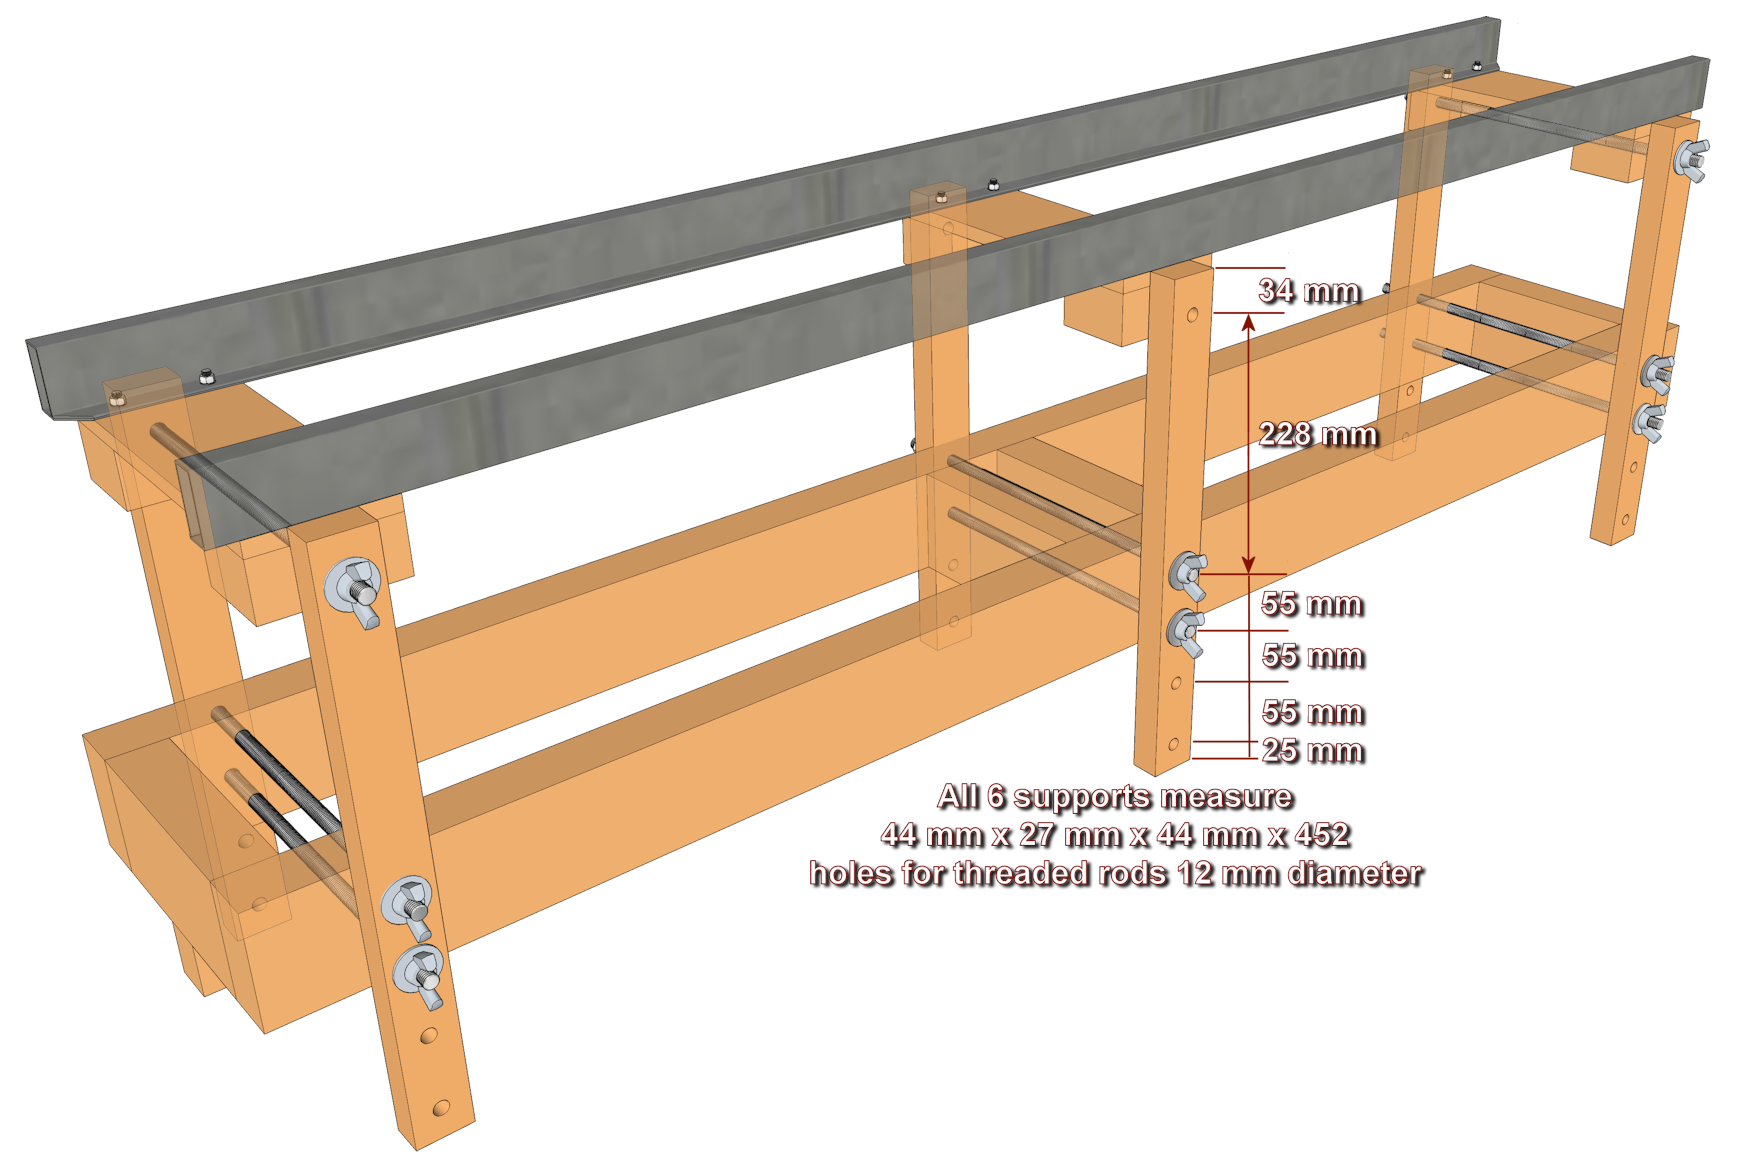 Sketch showing how the rails are supported above the base frame.